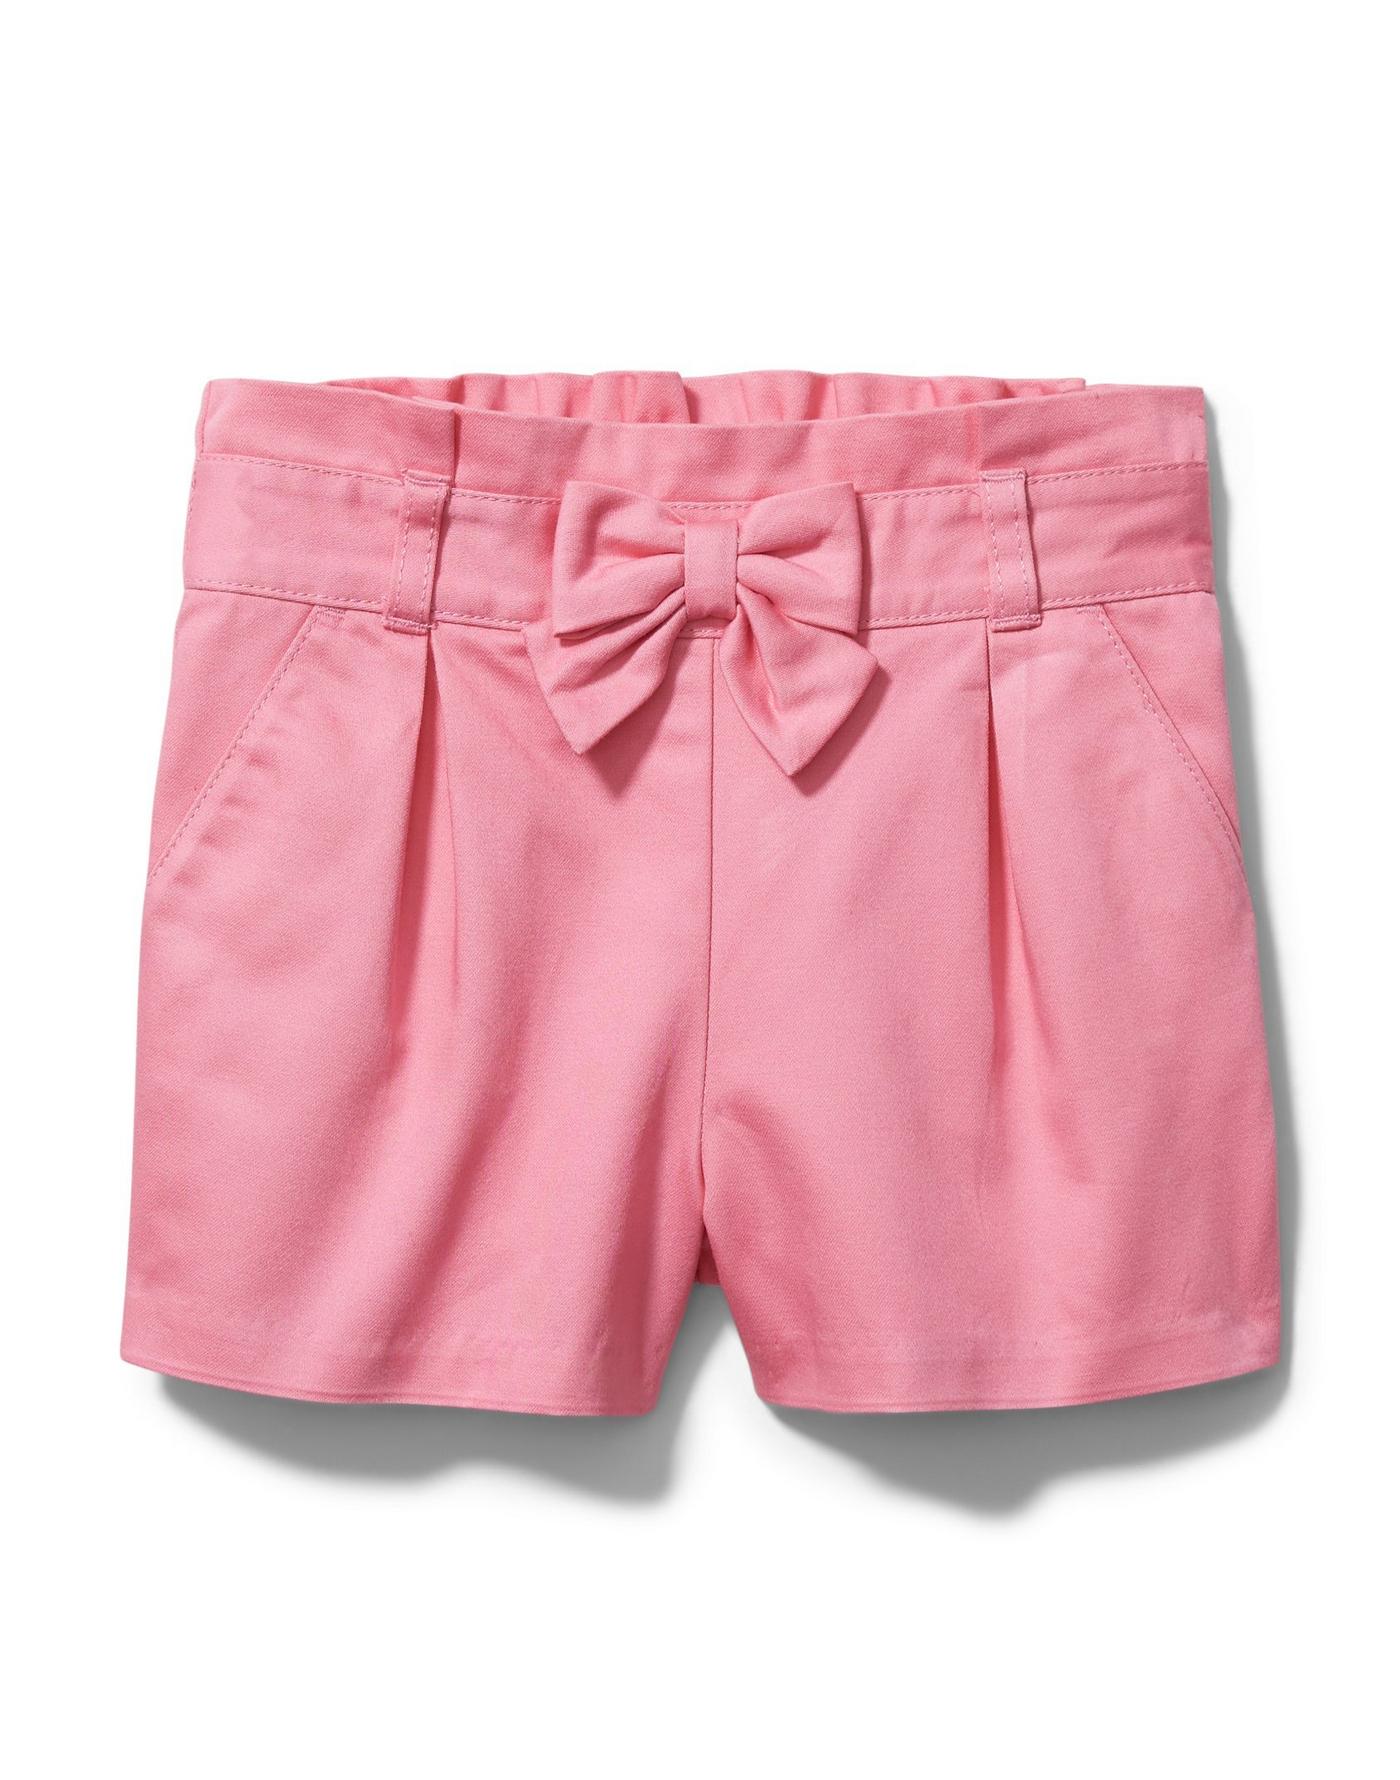 boy and girl matching spring outfits, pink bow shorts